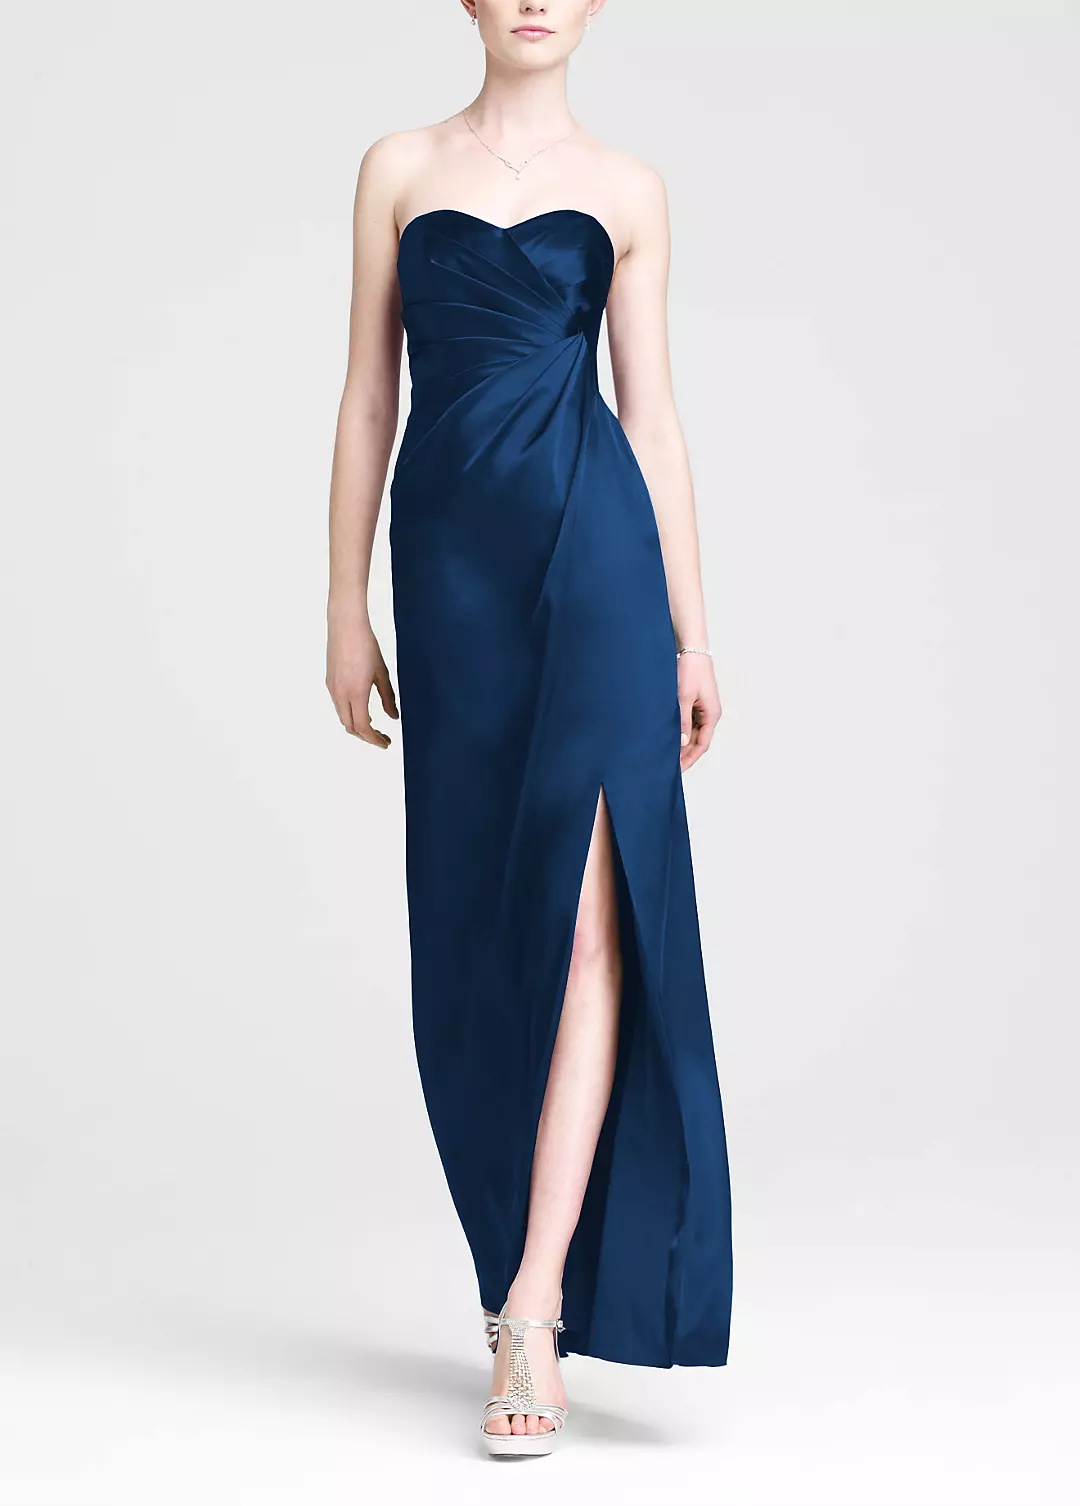 Strapless Long Charmeuse Dress with Slit Image